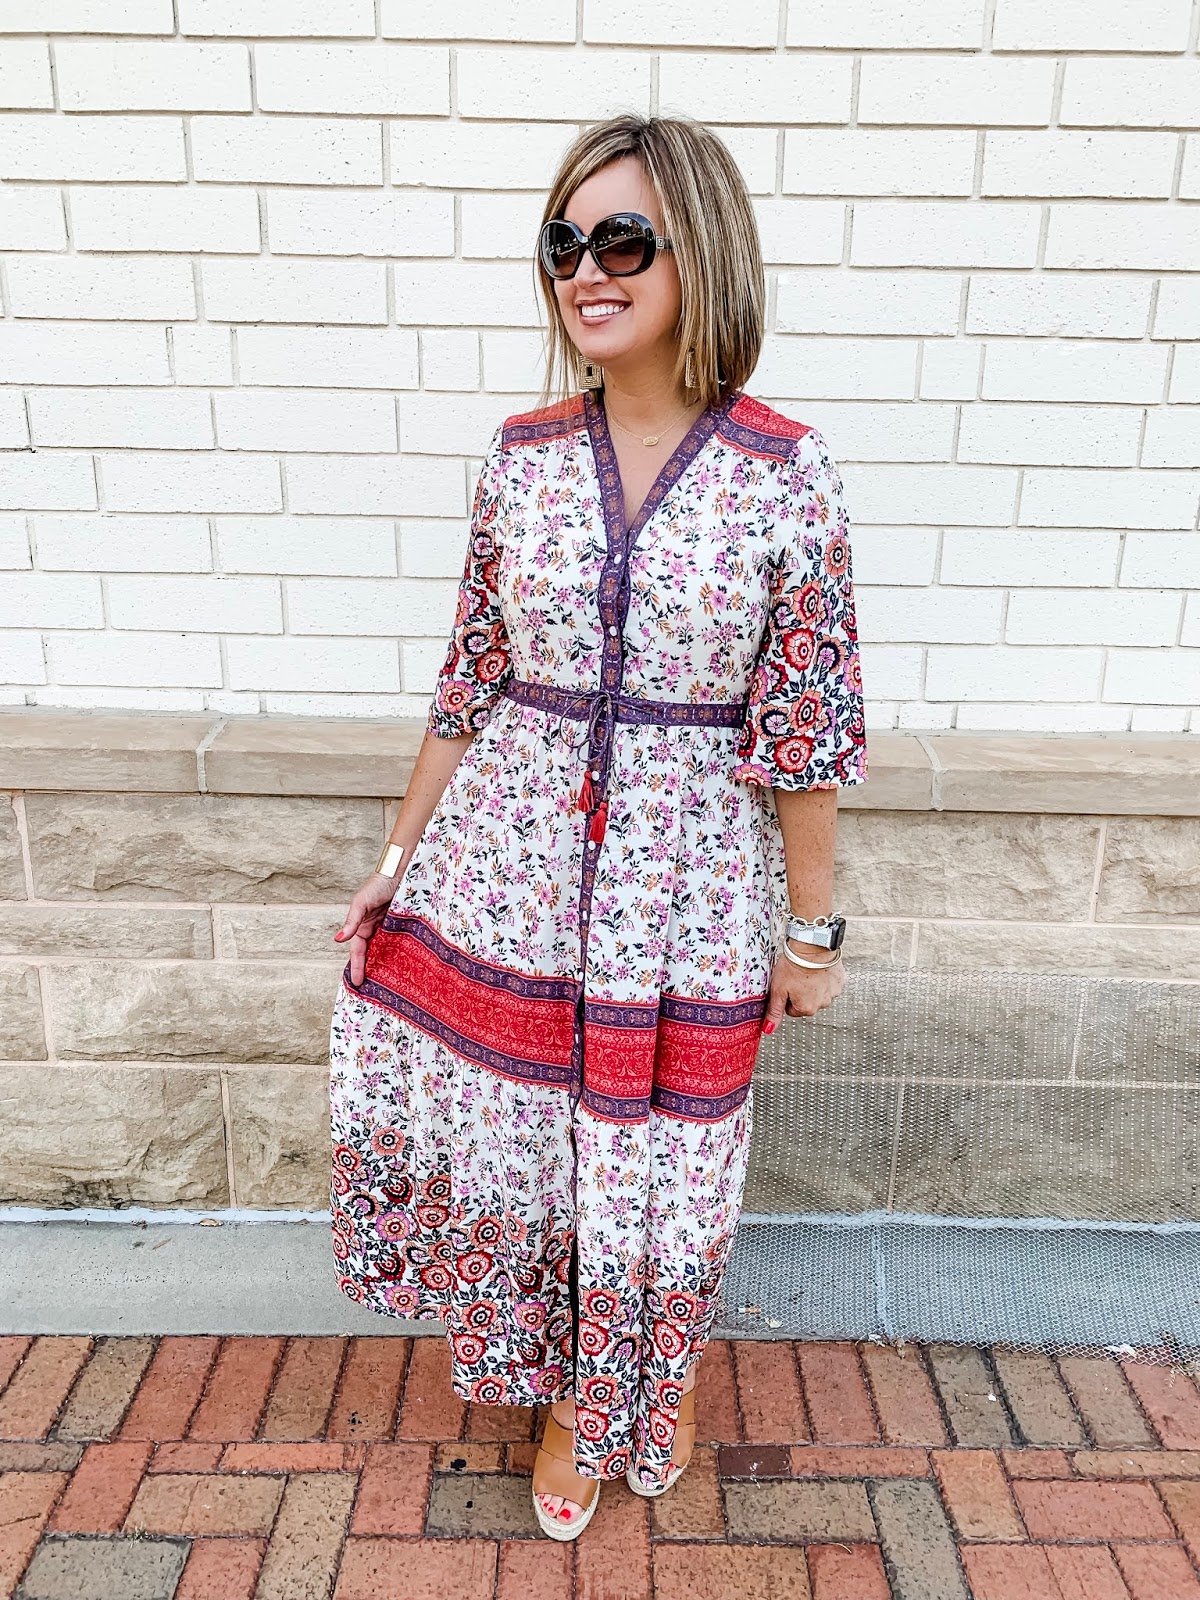 Summer Dresses Under $50 — Smart Southern Style